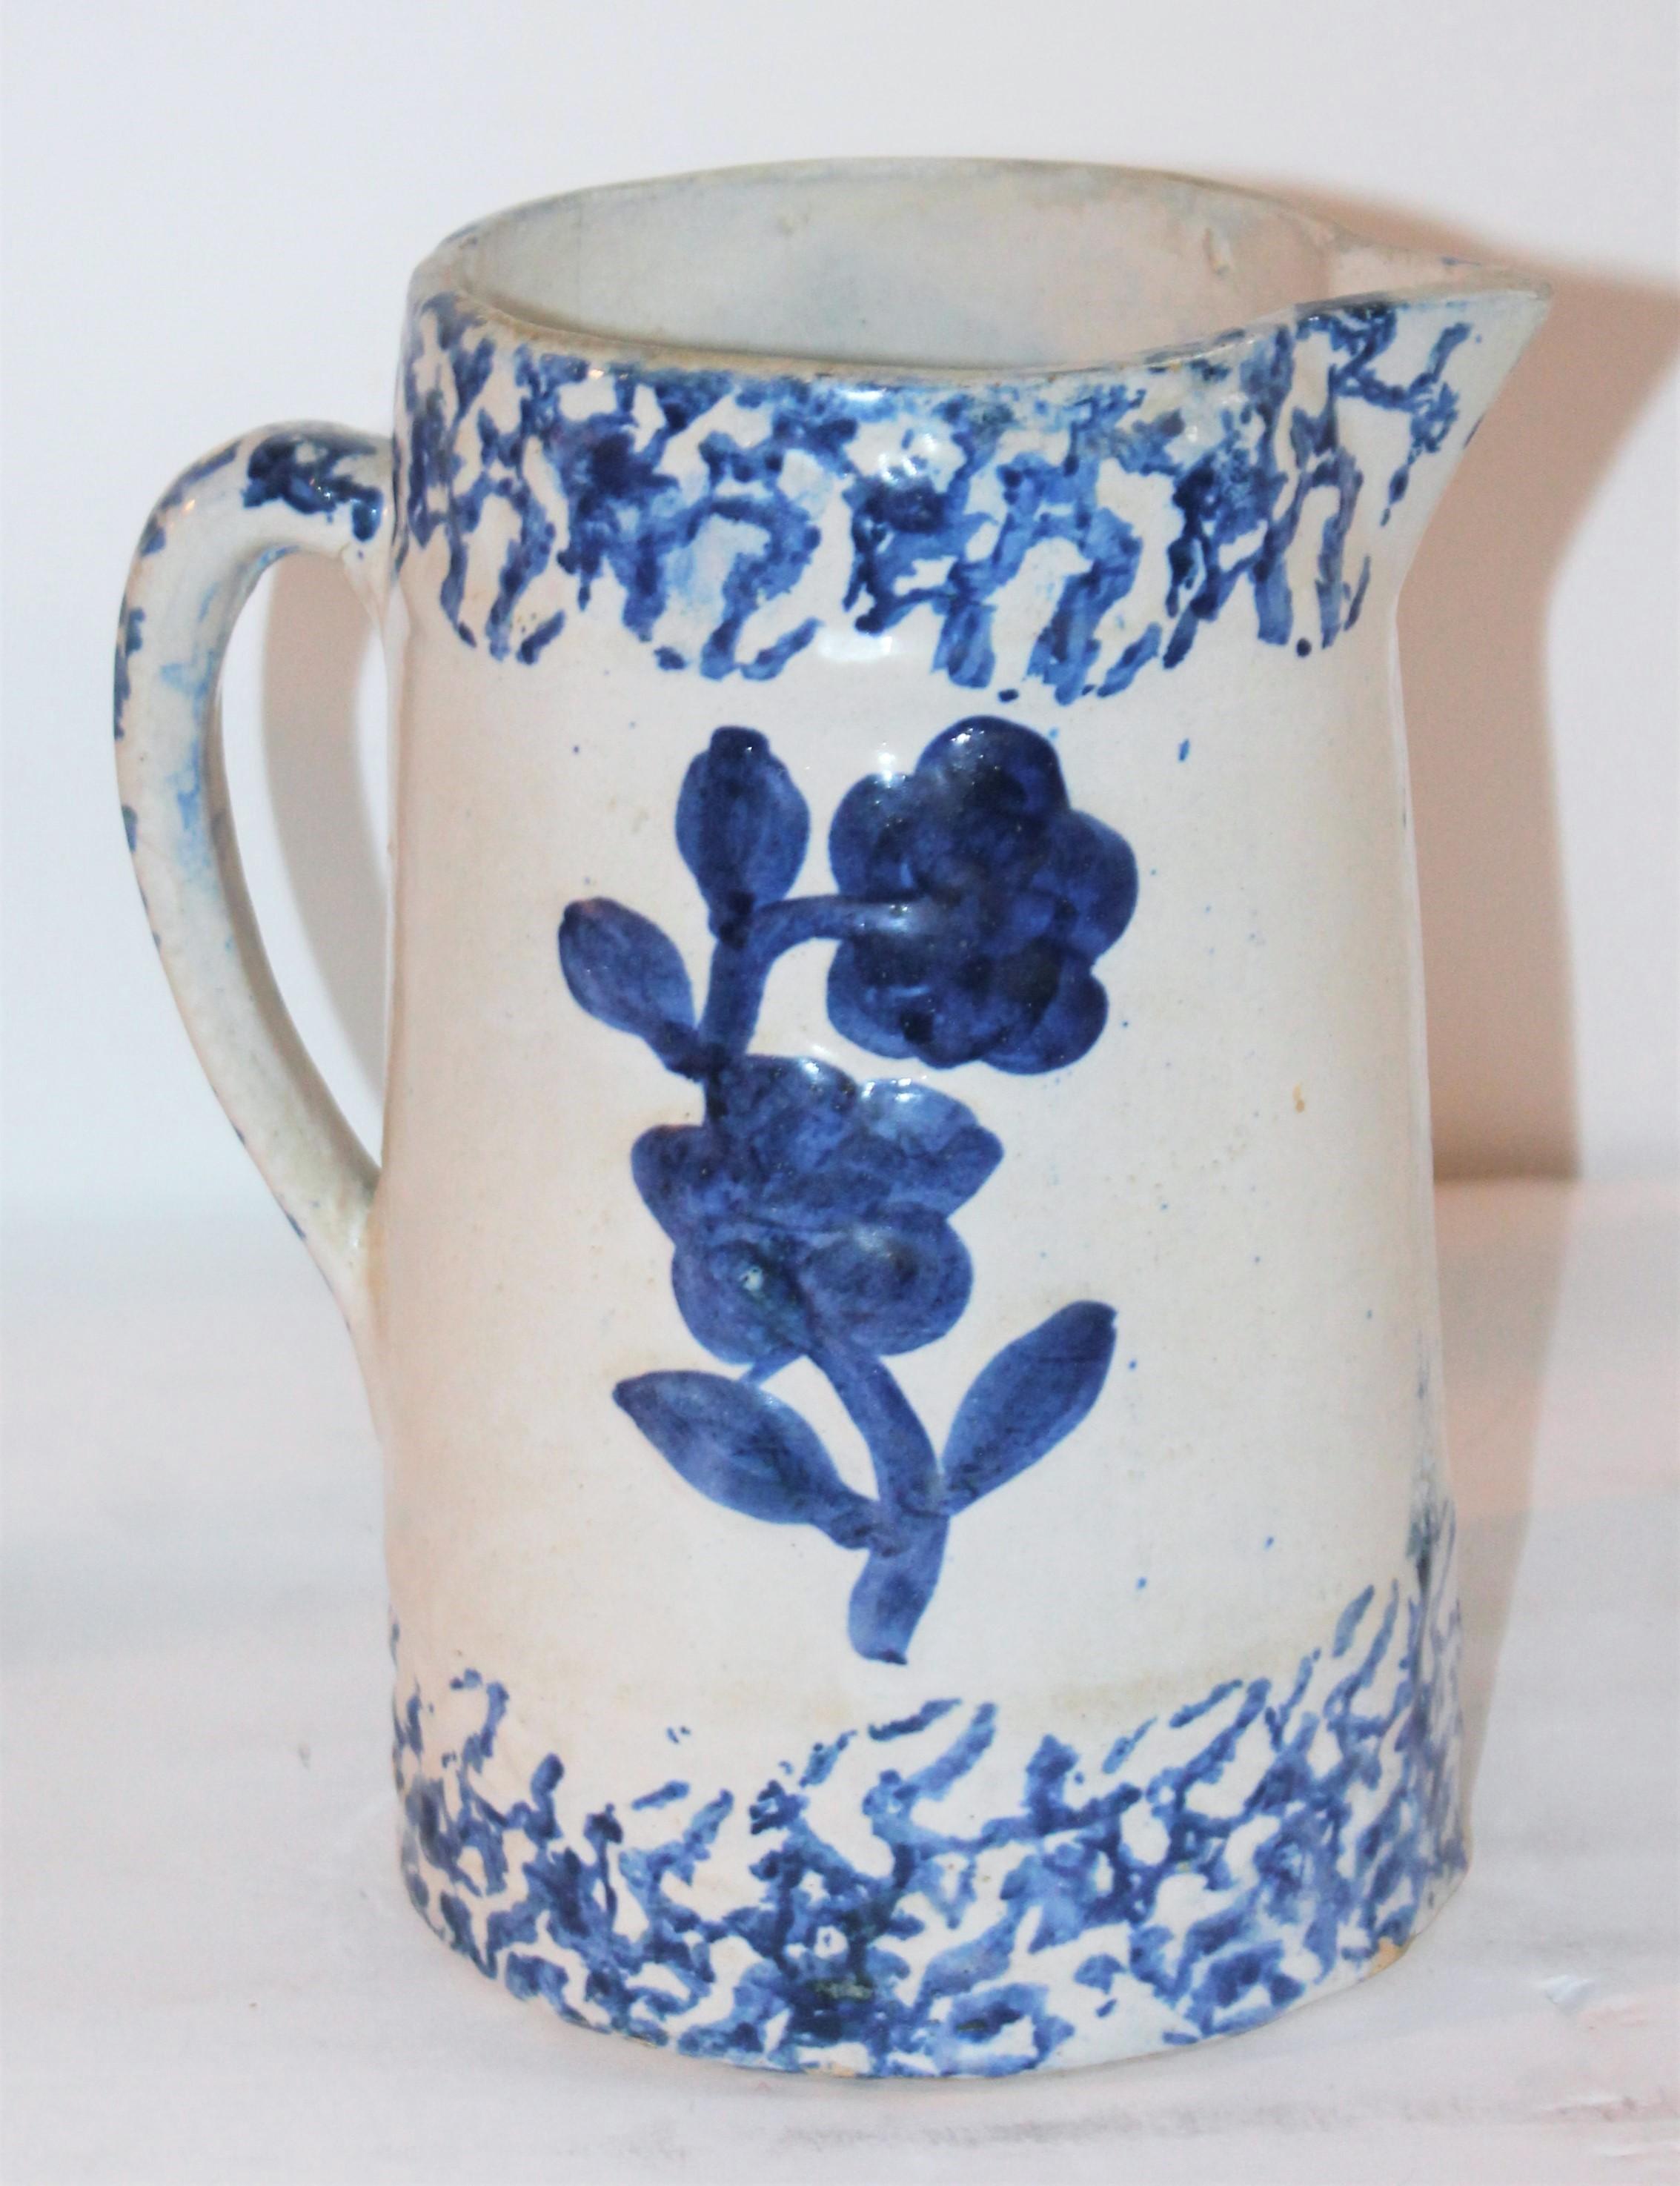 This 19th century sponge ware pitcher with floral design in good condition.